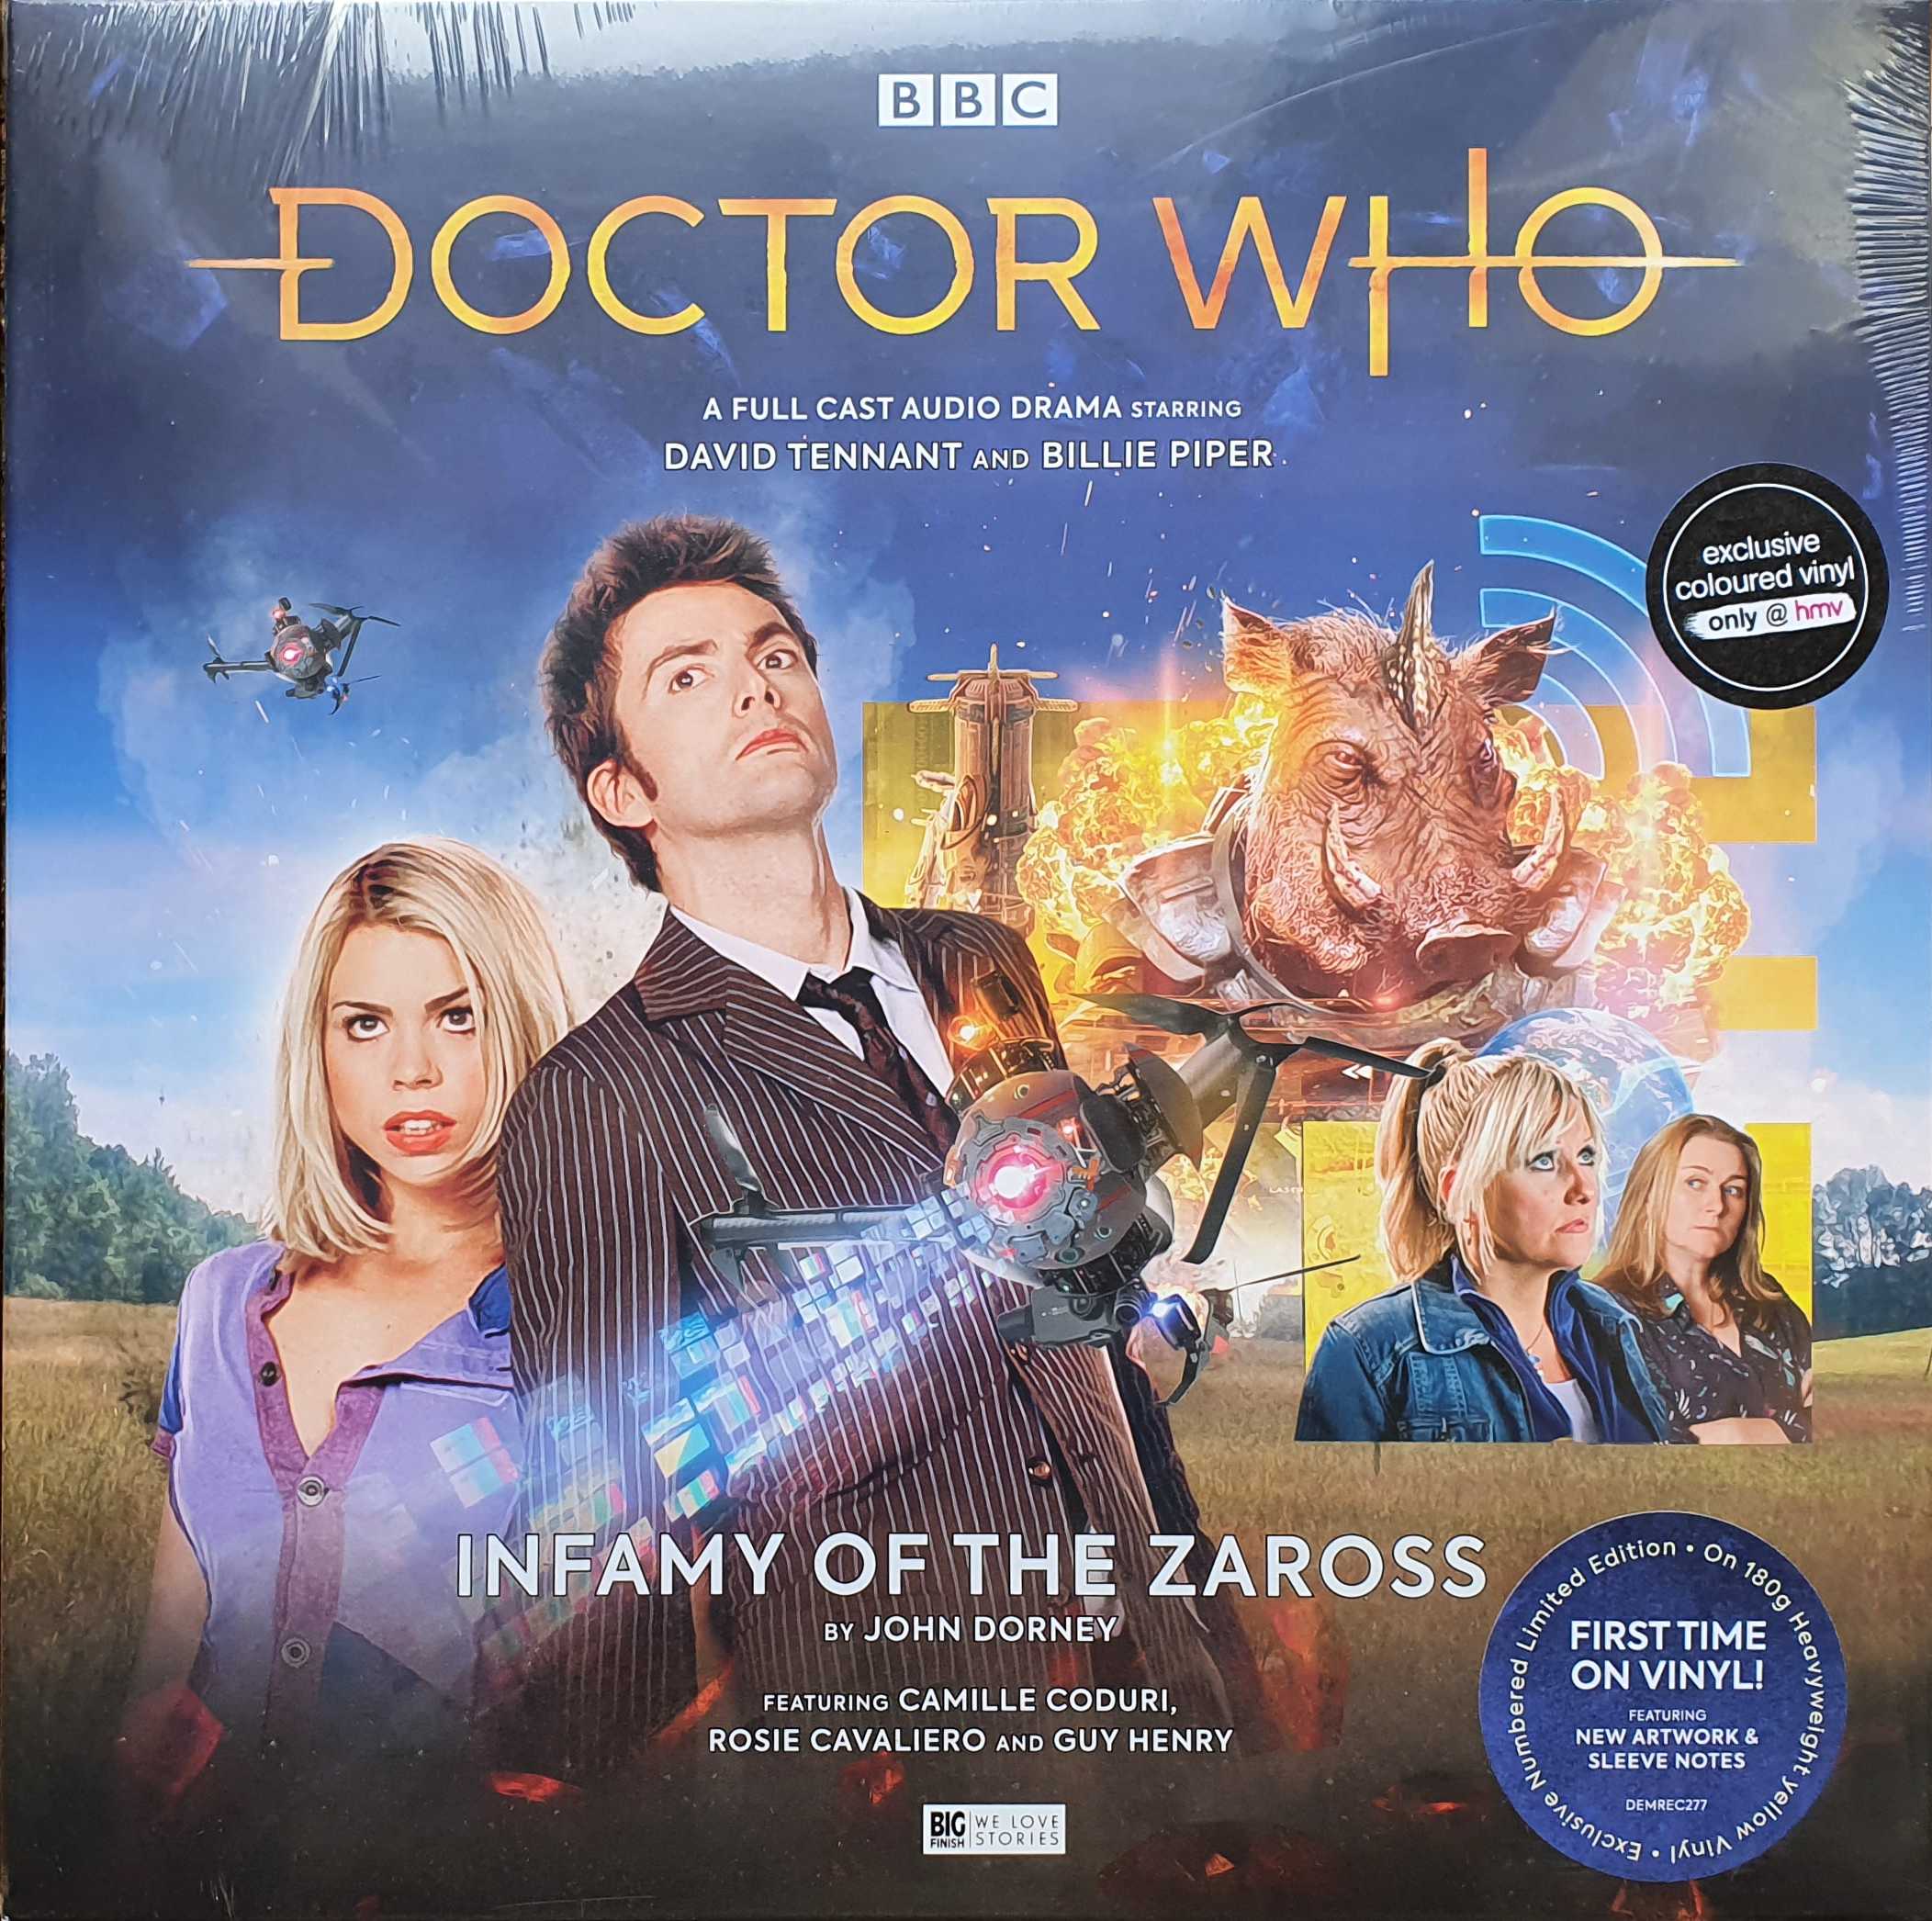 Picture of Doctor Who - Infamy of the Zaross by artist John Dorney from the BBC albums - Records and Tapes library